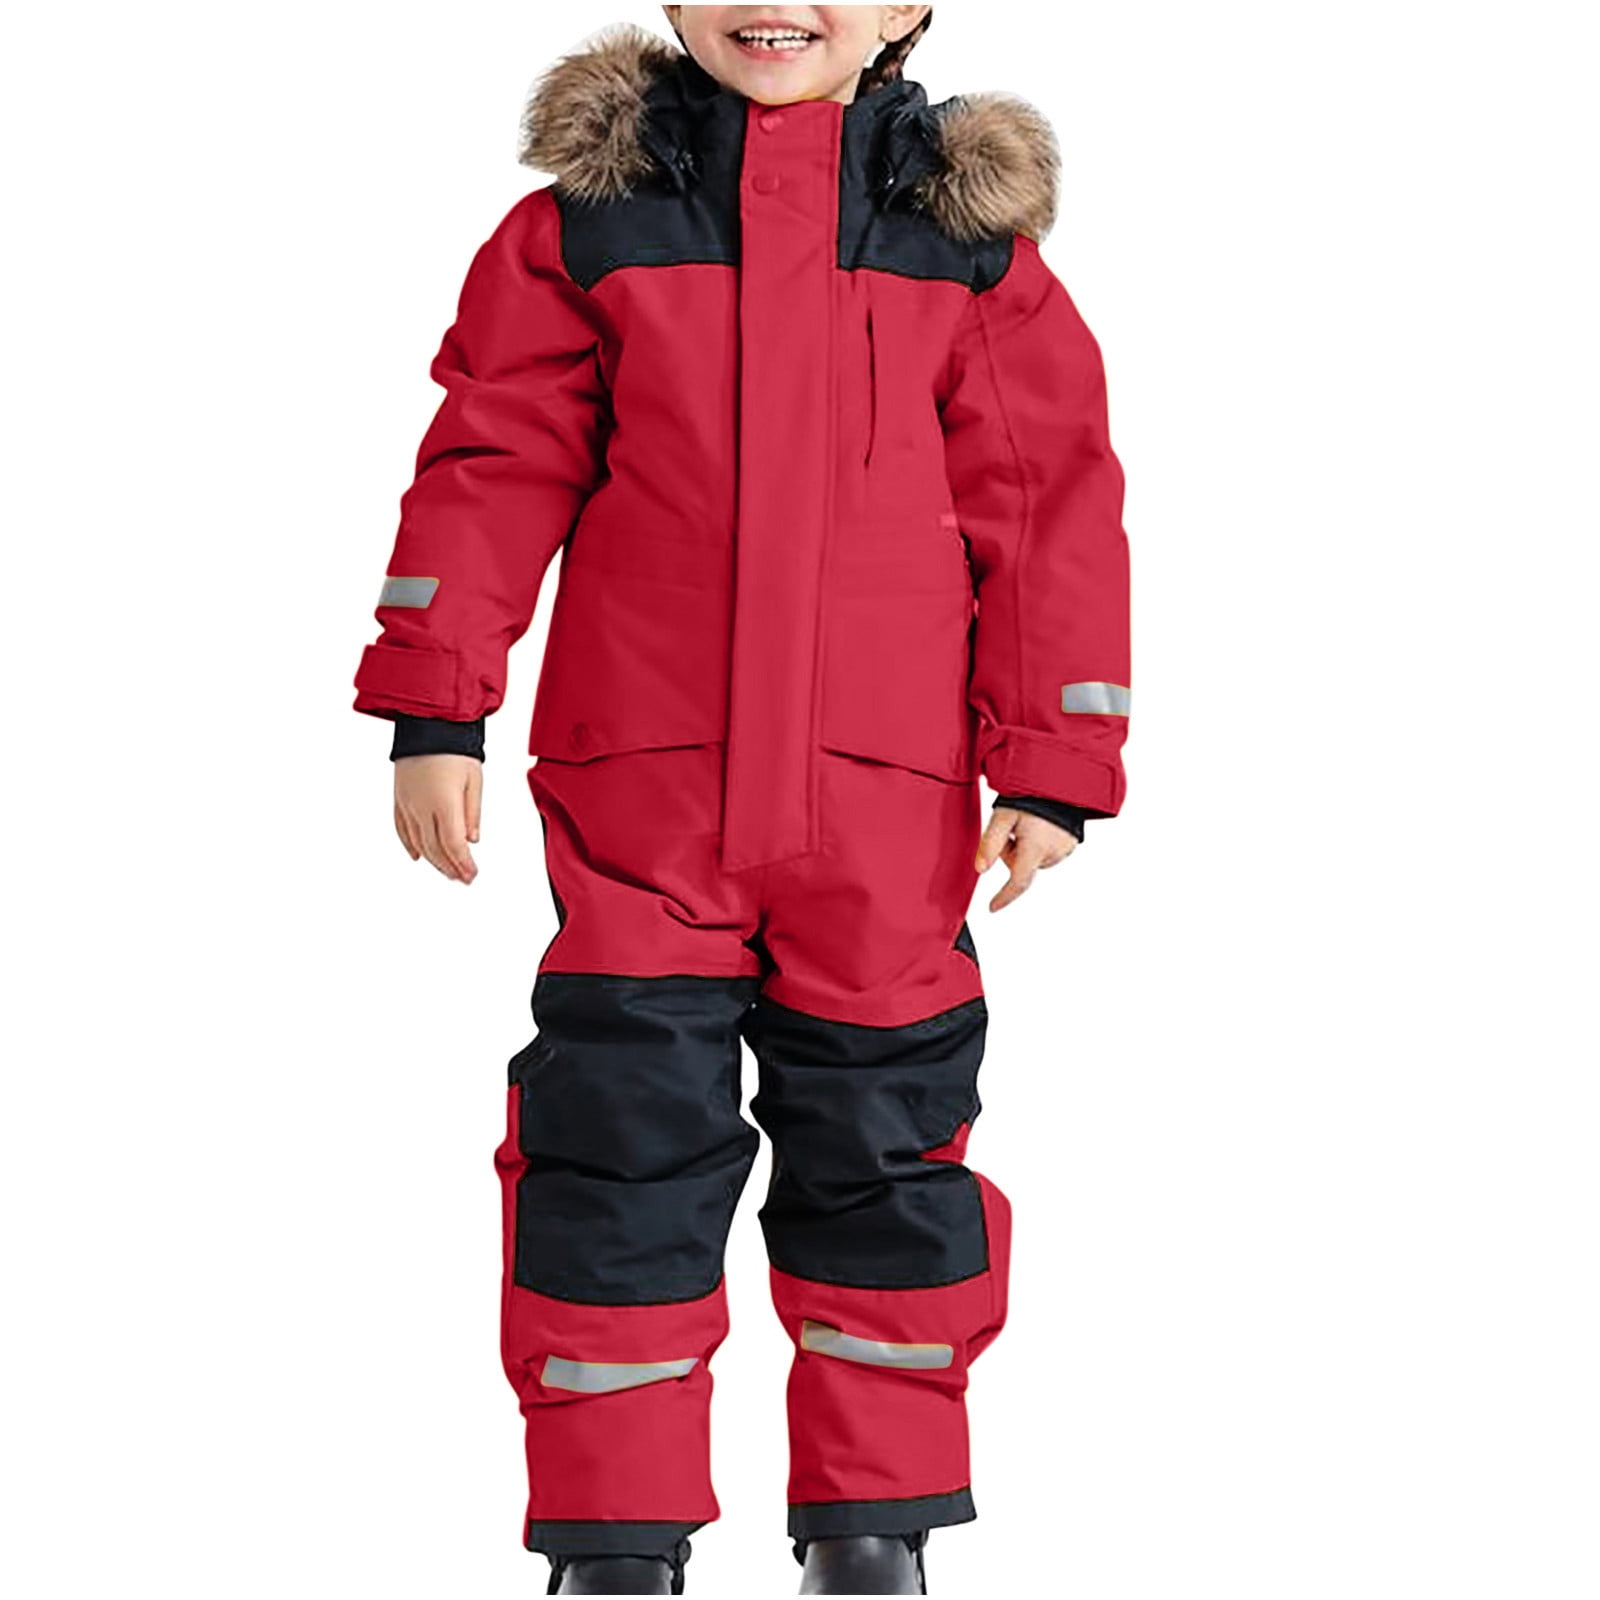 Zeceouar Toddler Teens Kids Boys Girls Insulated Snow Suit Snowsuits  Overalls Winter Waterproof Hooded Ski Jacket Romper Jumpsuit Outfit for  Outdoor 1-15 Years 